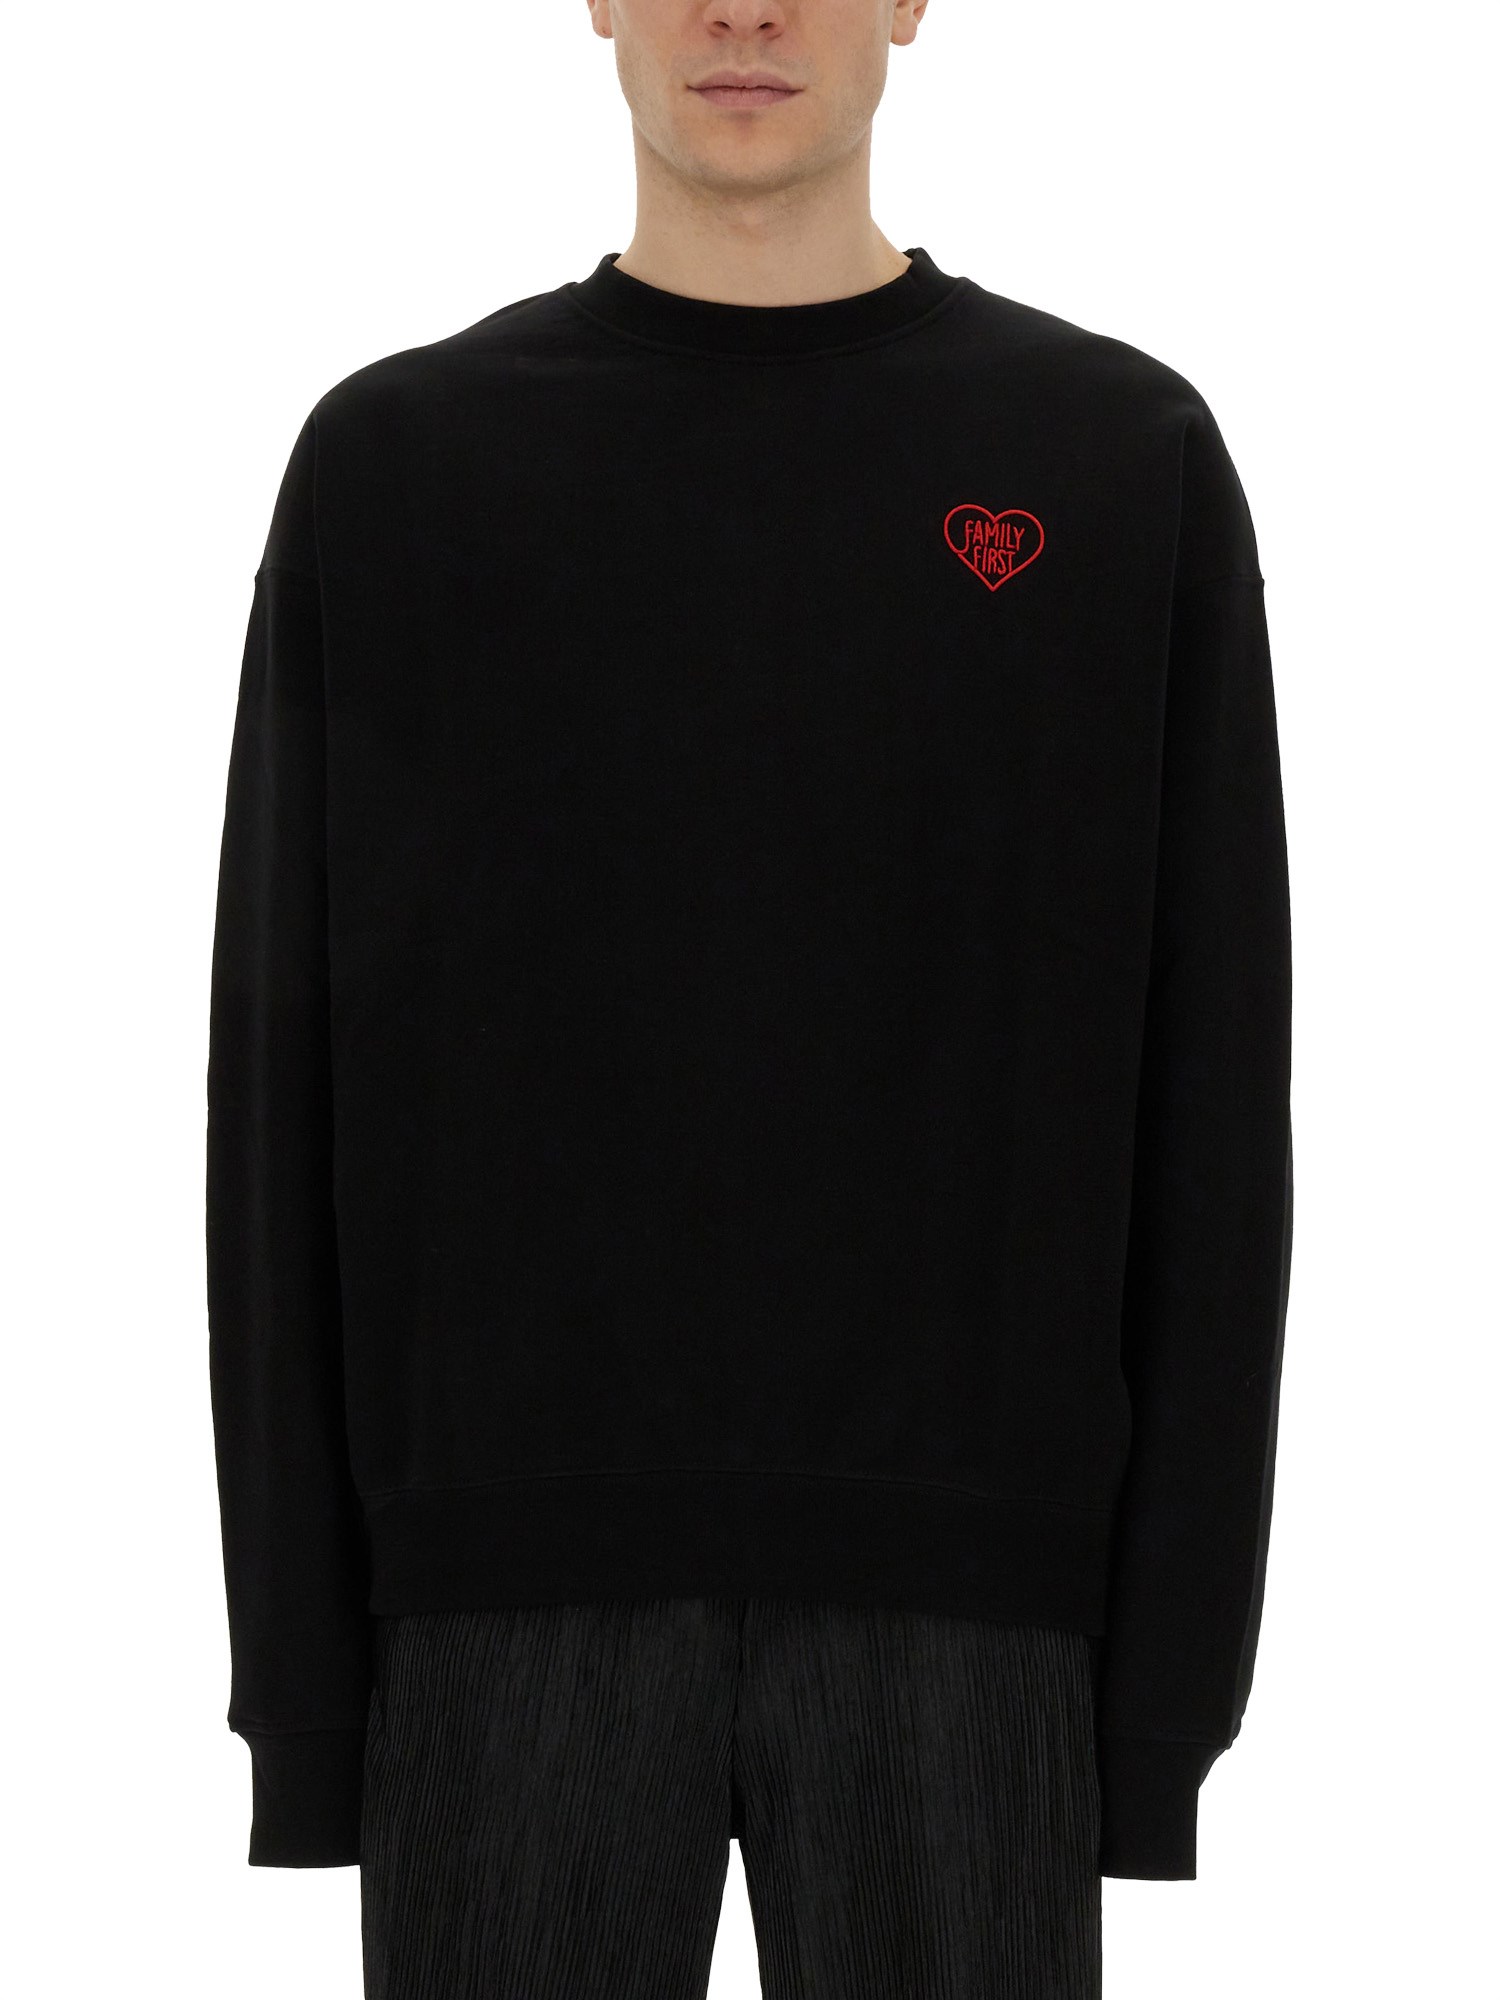 family first sweatshirt with heart embroidery